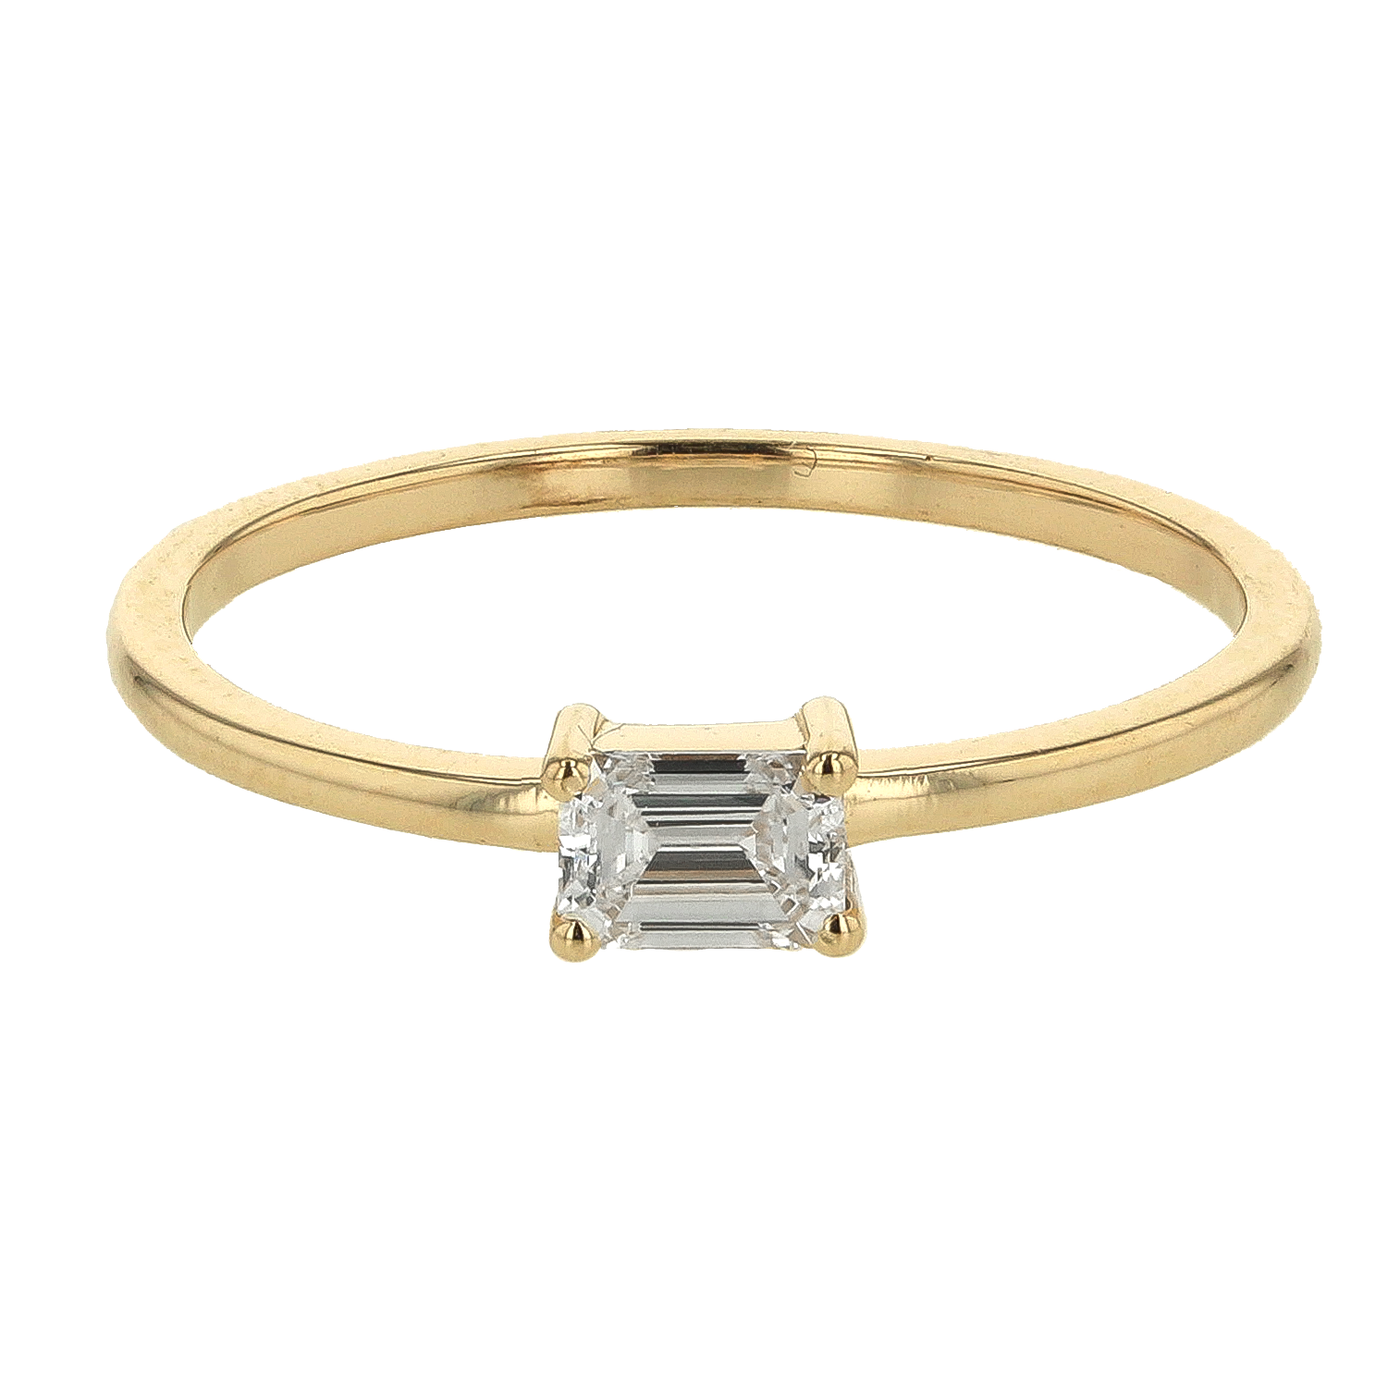 "The Reflection" 0.26 CT Emerald Cut Diamond Solitaire Ring